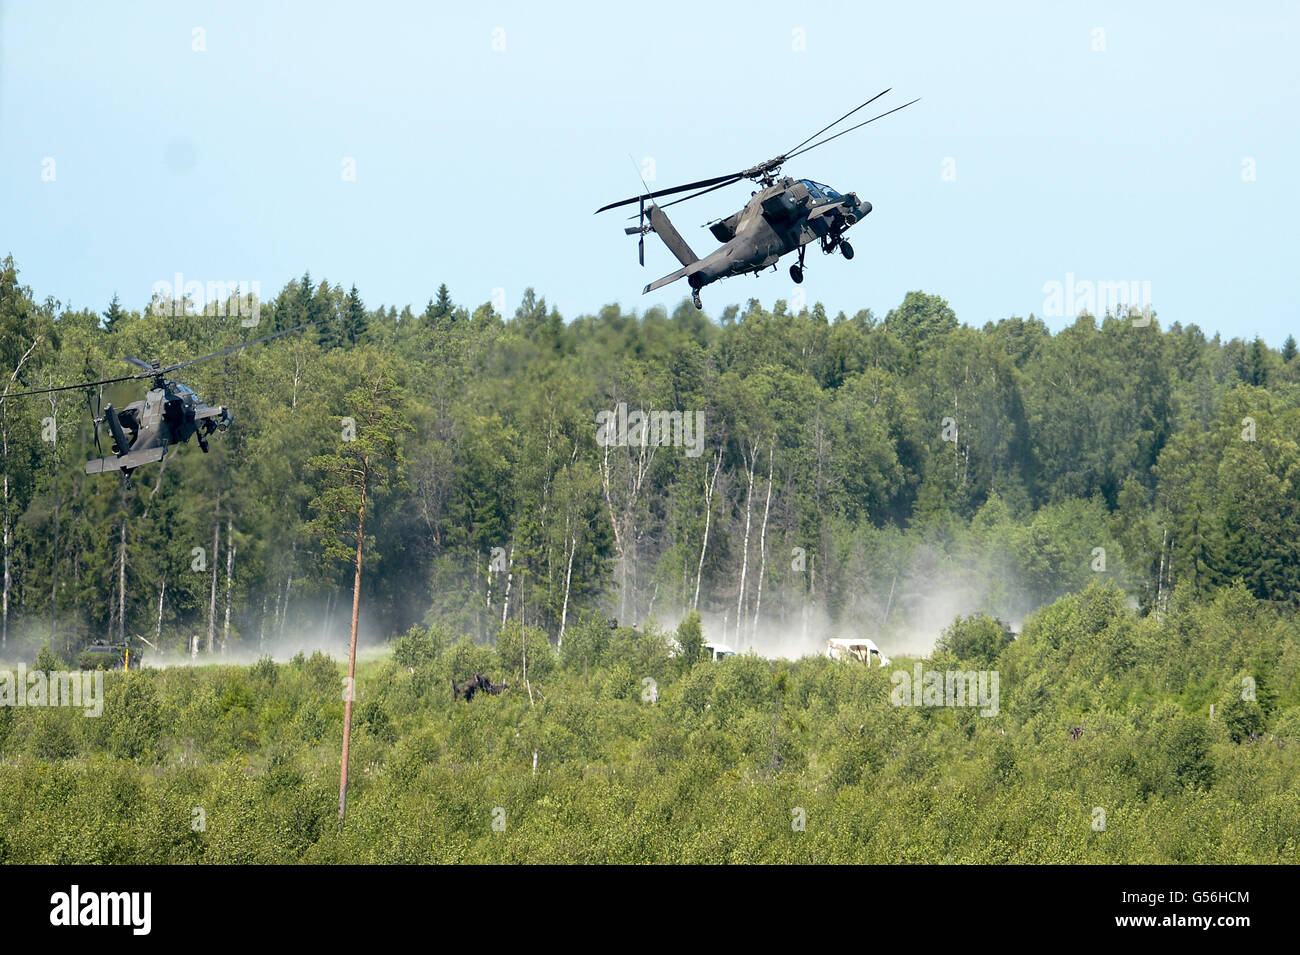 Tapa. 20th June, 2016. US Air forces AH-64 Apache helicopters participate in Saber Strike military exercise at Central pylon in Tapa, Estonia on June 20, 2016. Saber Strike is an annual U.S.-led exercise of land and air forces. © Sergei Stepanov/Xinhua/Alamy Live News Stock Photo